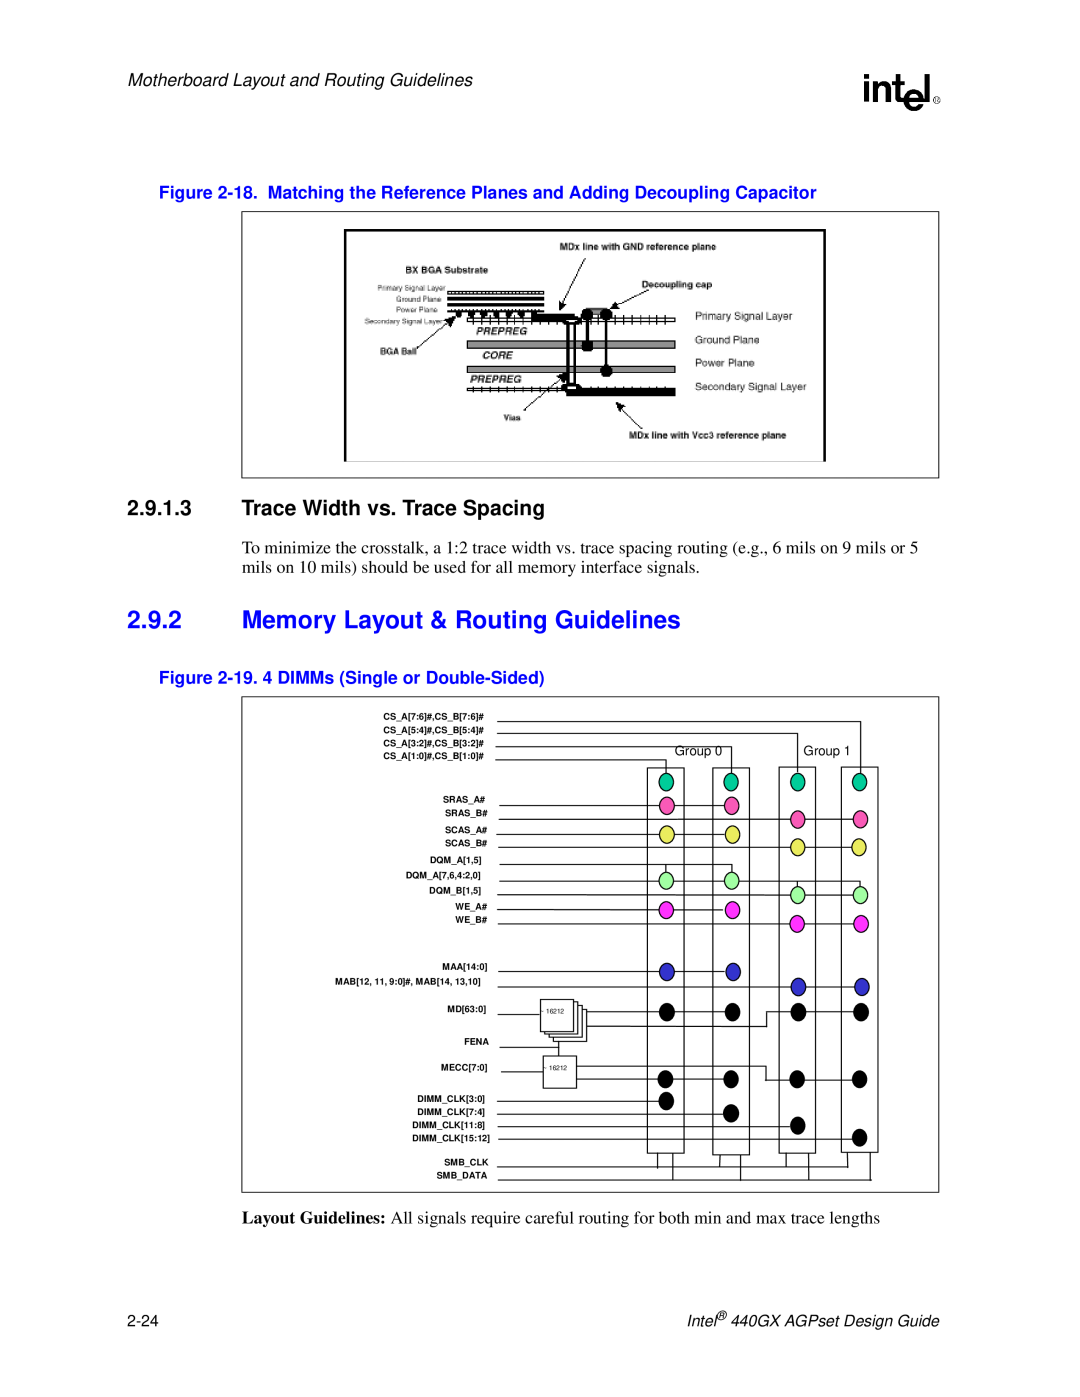 Intel 440GX manual Memory Layout & Routing Guidelines, Trace Width vs. Trace Spacing, 19. 4 DIMMs Single or Double-Sided 